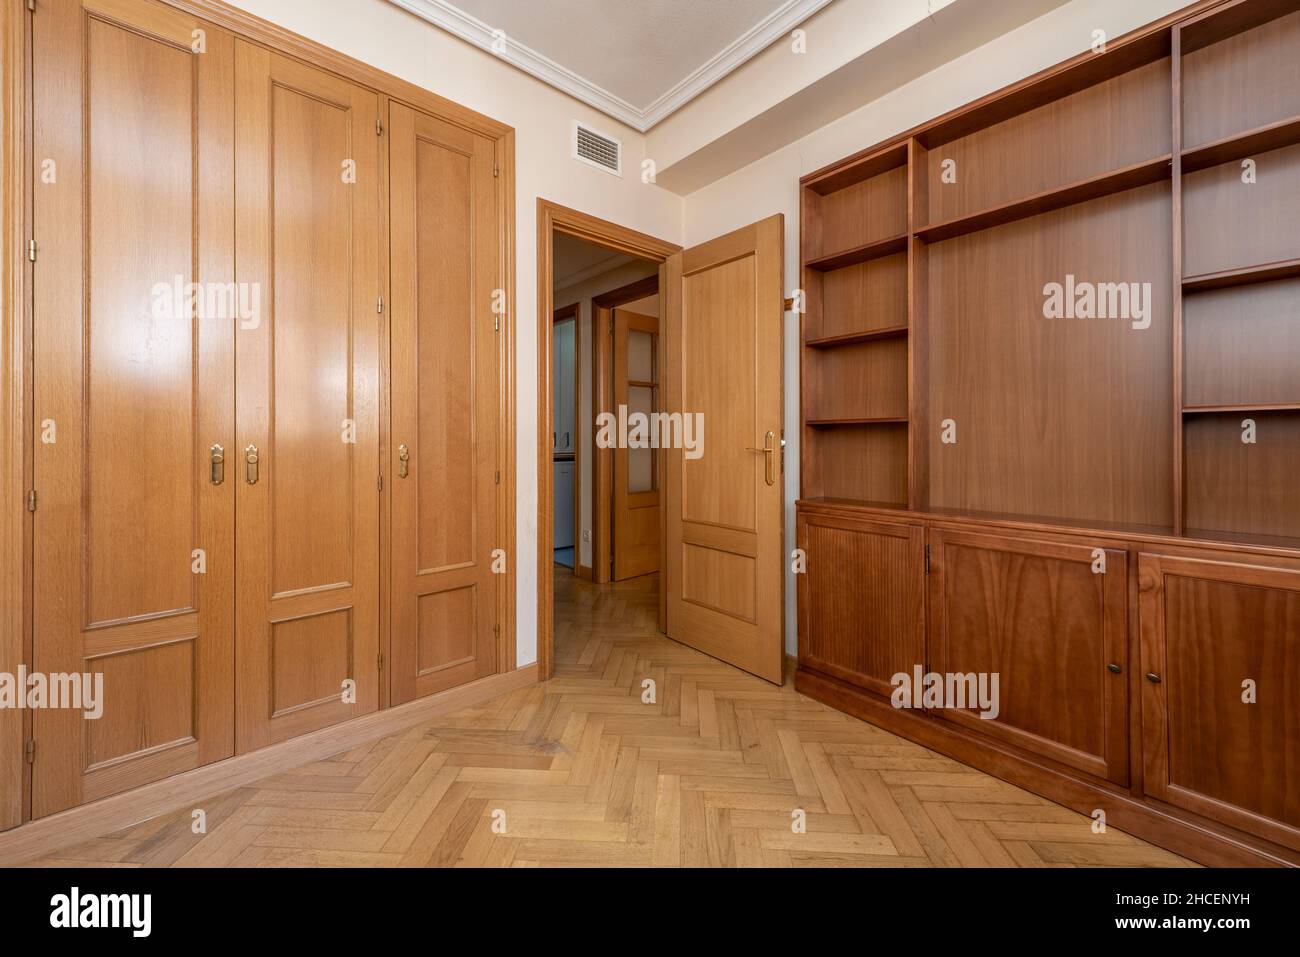 Beautiful Built In Wardrobe Bedroom High Resolution Stock Photography and  Images - Alamy